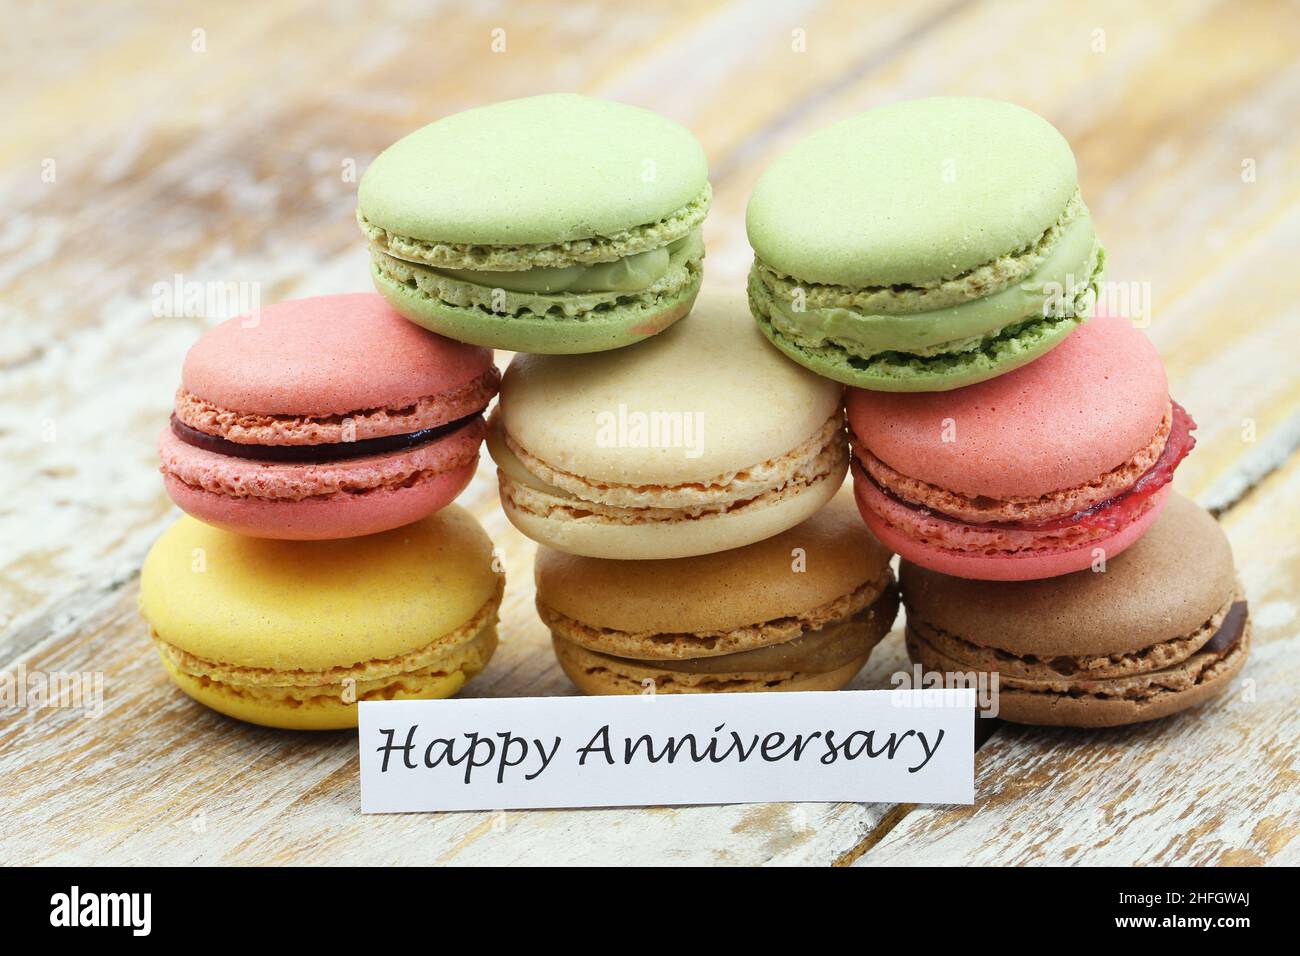 Happy anniversary card with a stack of colorful, crunchy, sweet macaroons Stock Photo